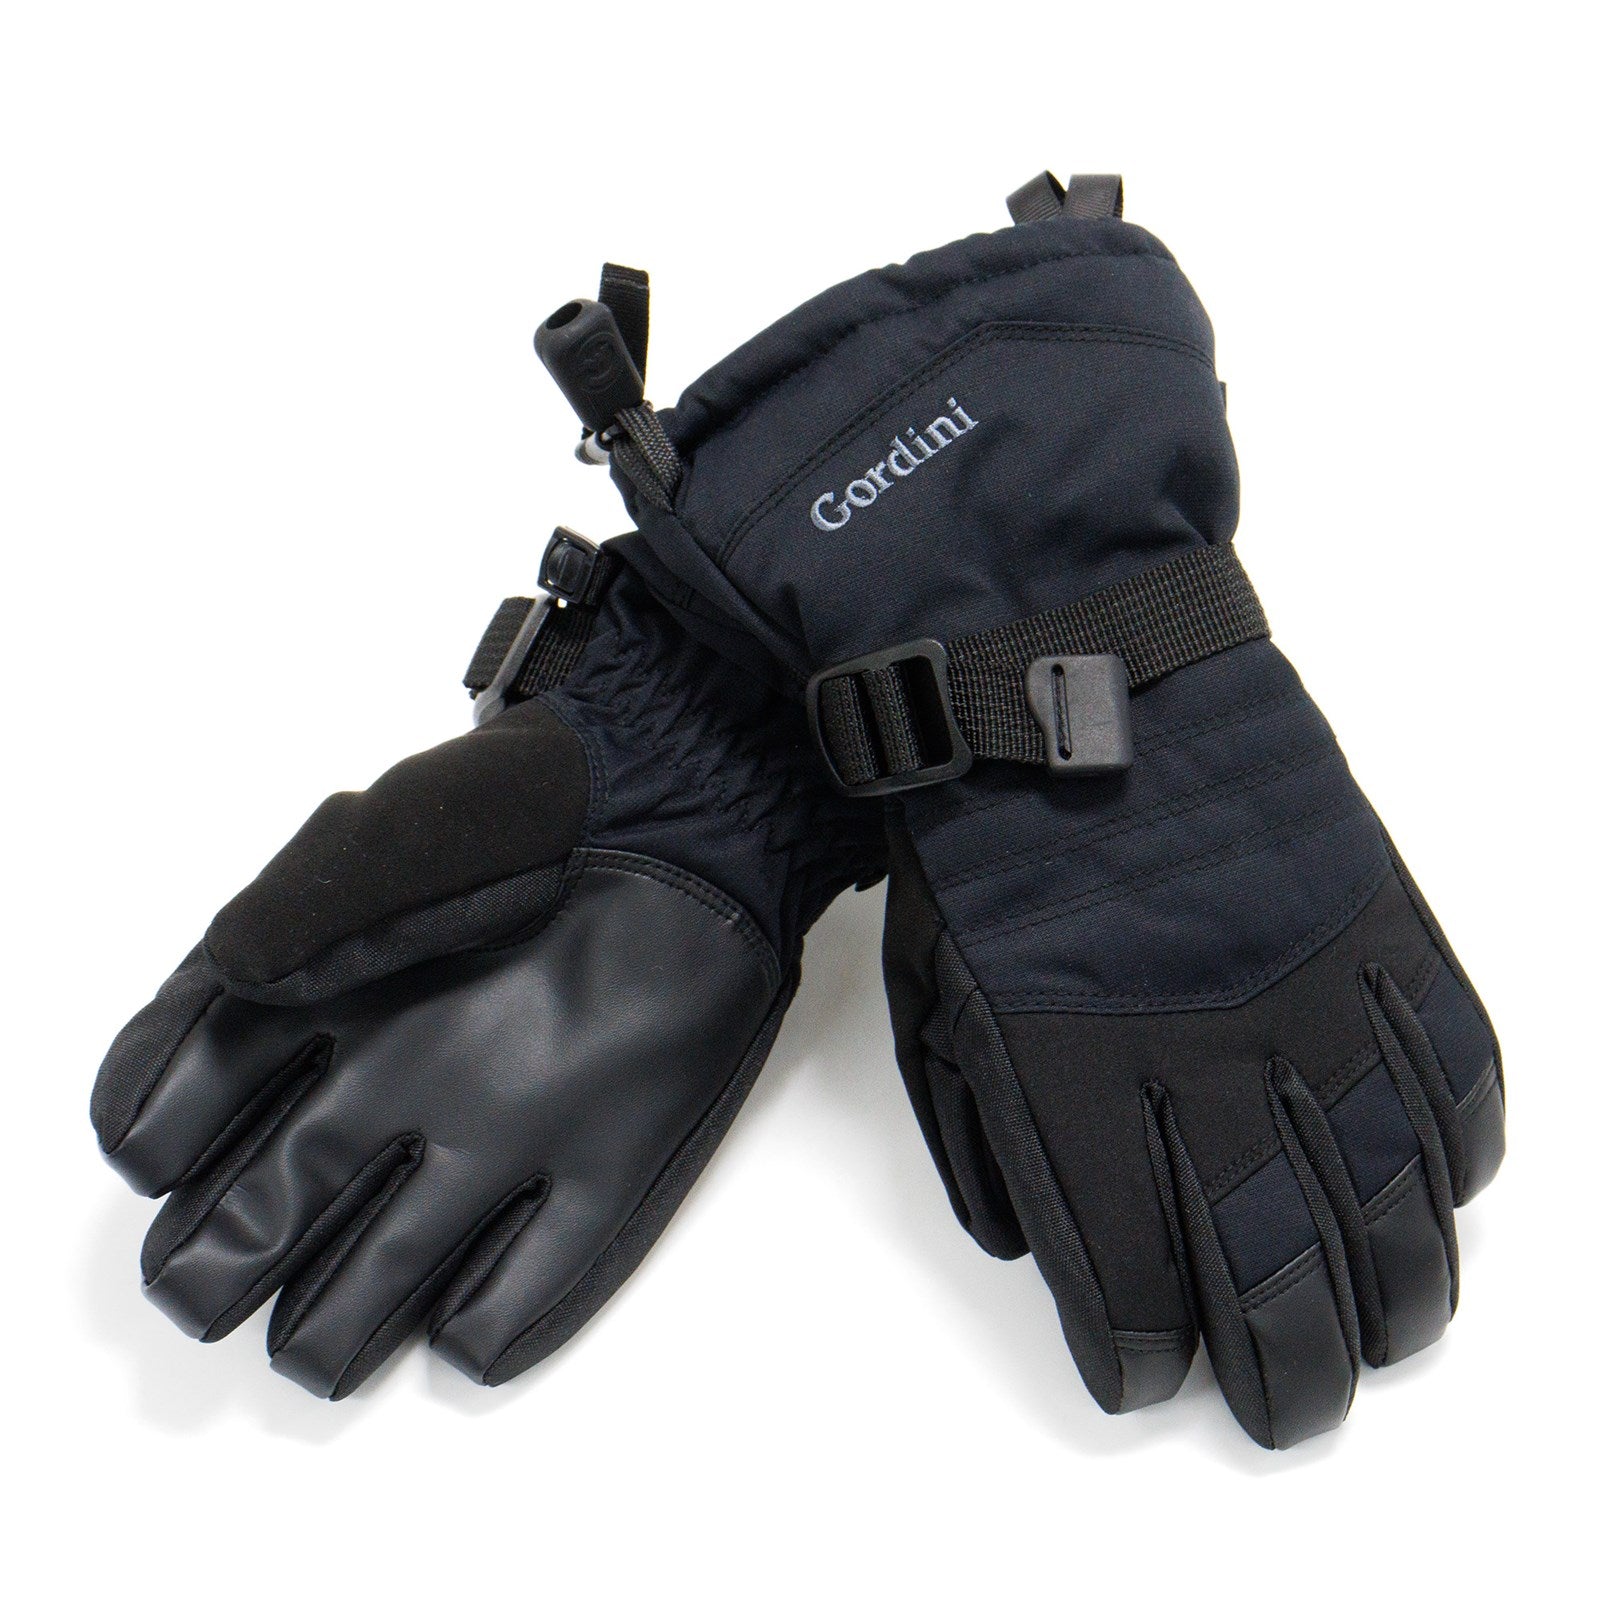 Gordini Boy Charger Waterproof Insulated Junior Gloves